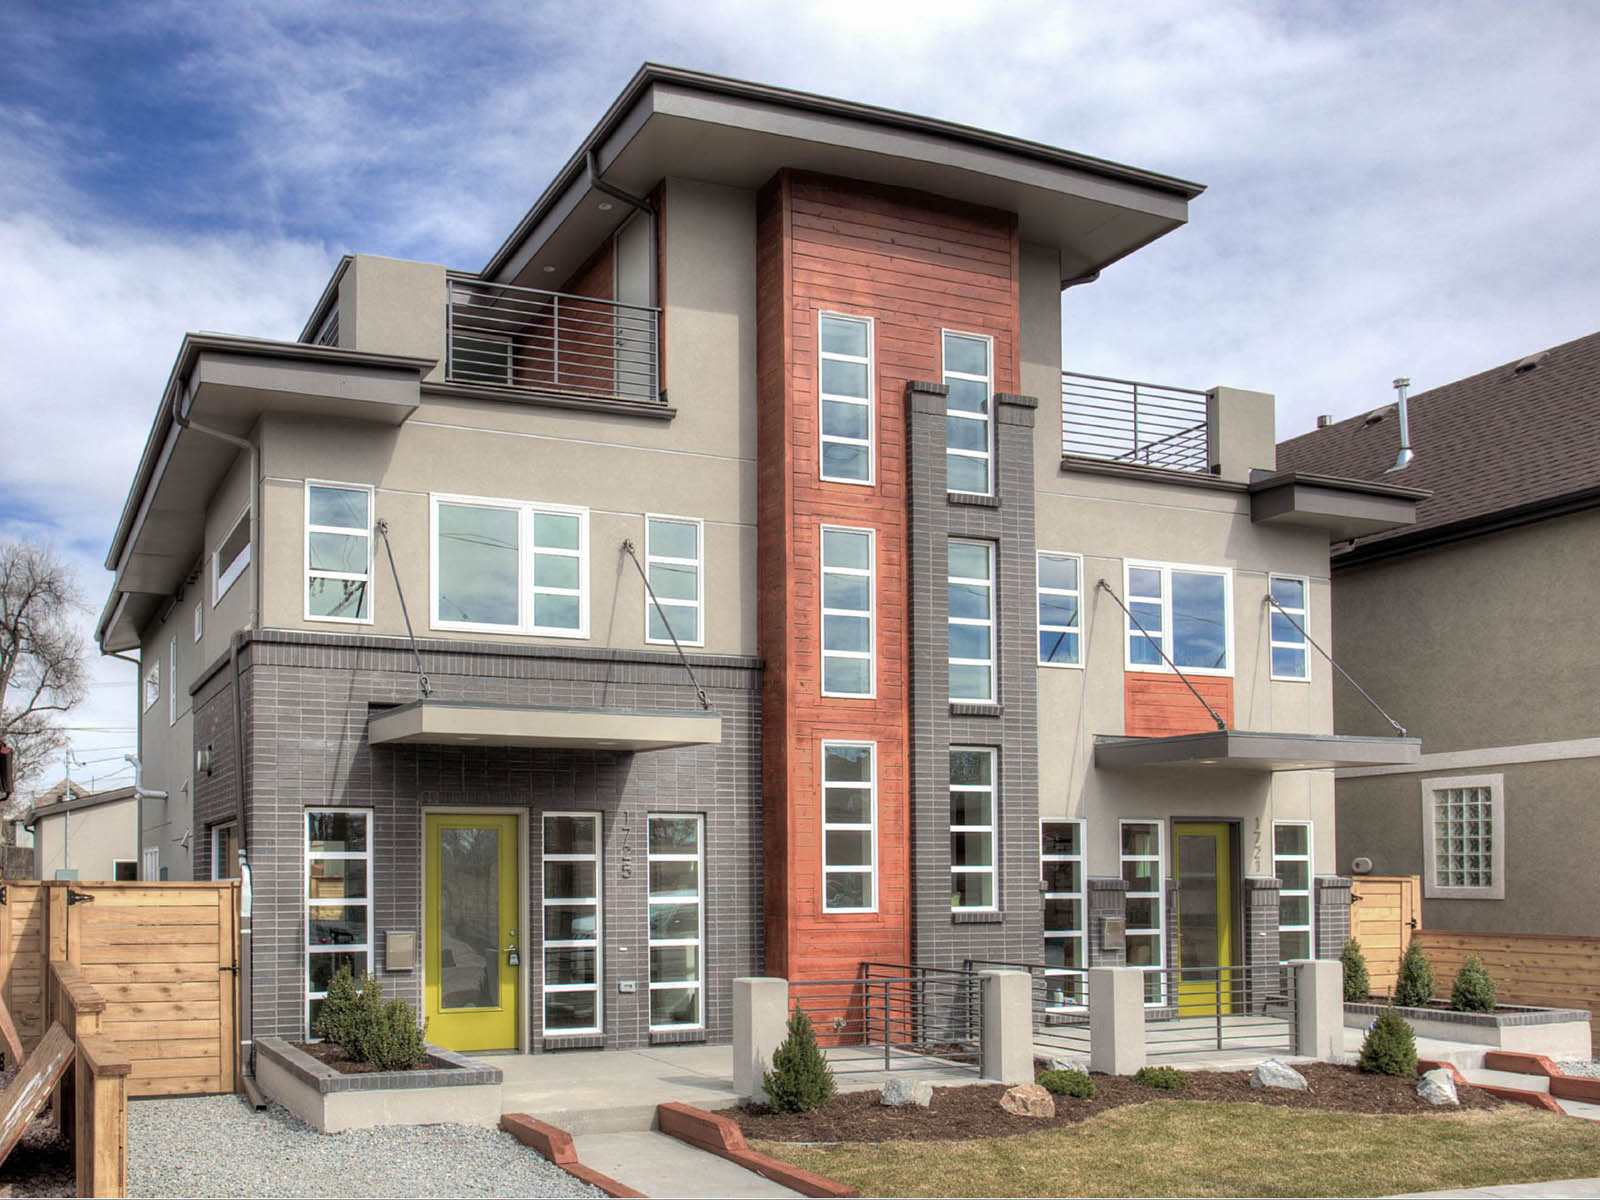 Past Real estate Projects Weins Development Group - Weins Development Group - Award-winning real estate developers in Denver, Colorado. Top #1 of Builders producing high-quality townhomes, condos, apartments, retail, & office projects